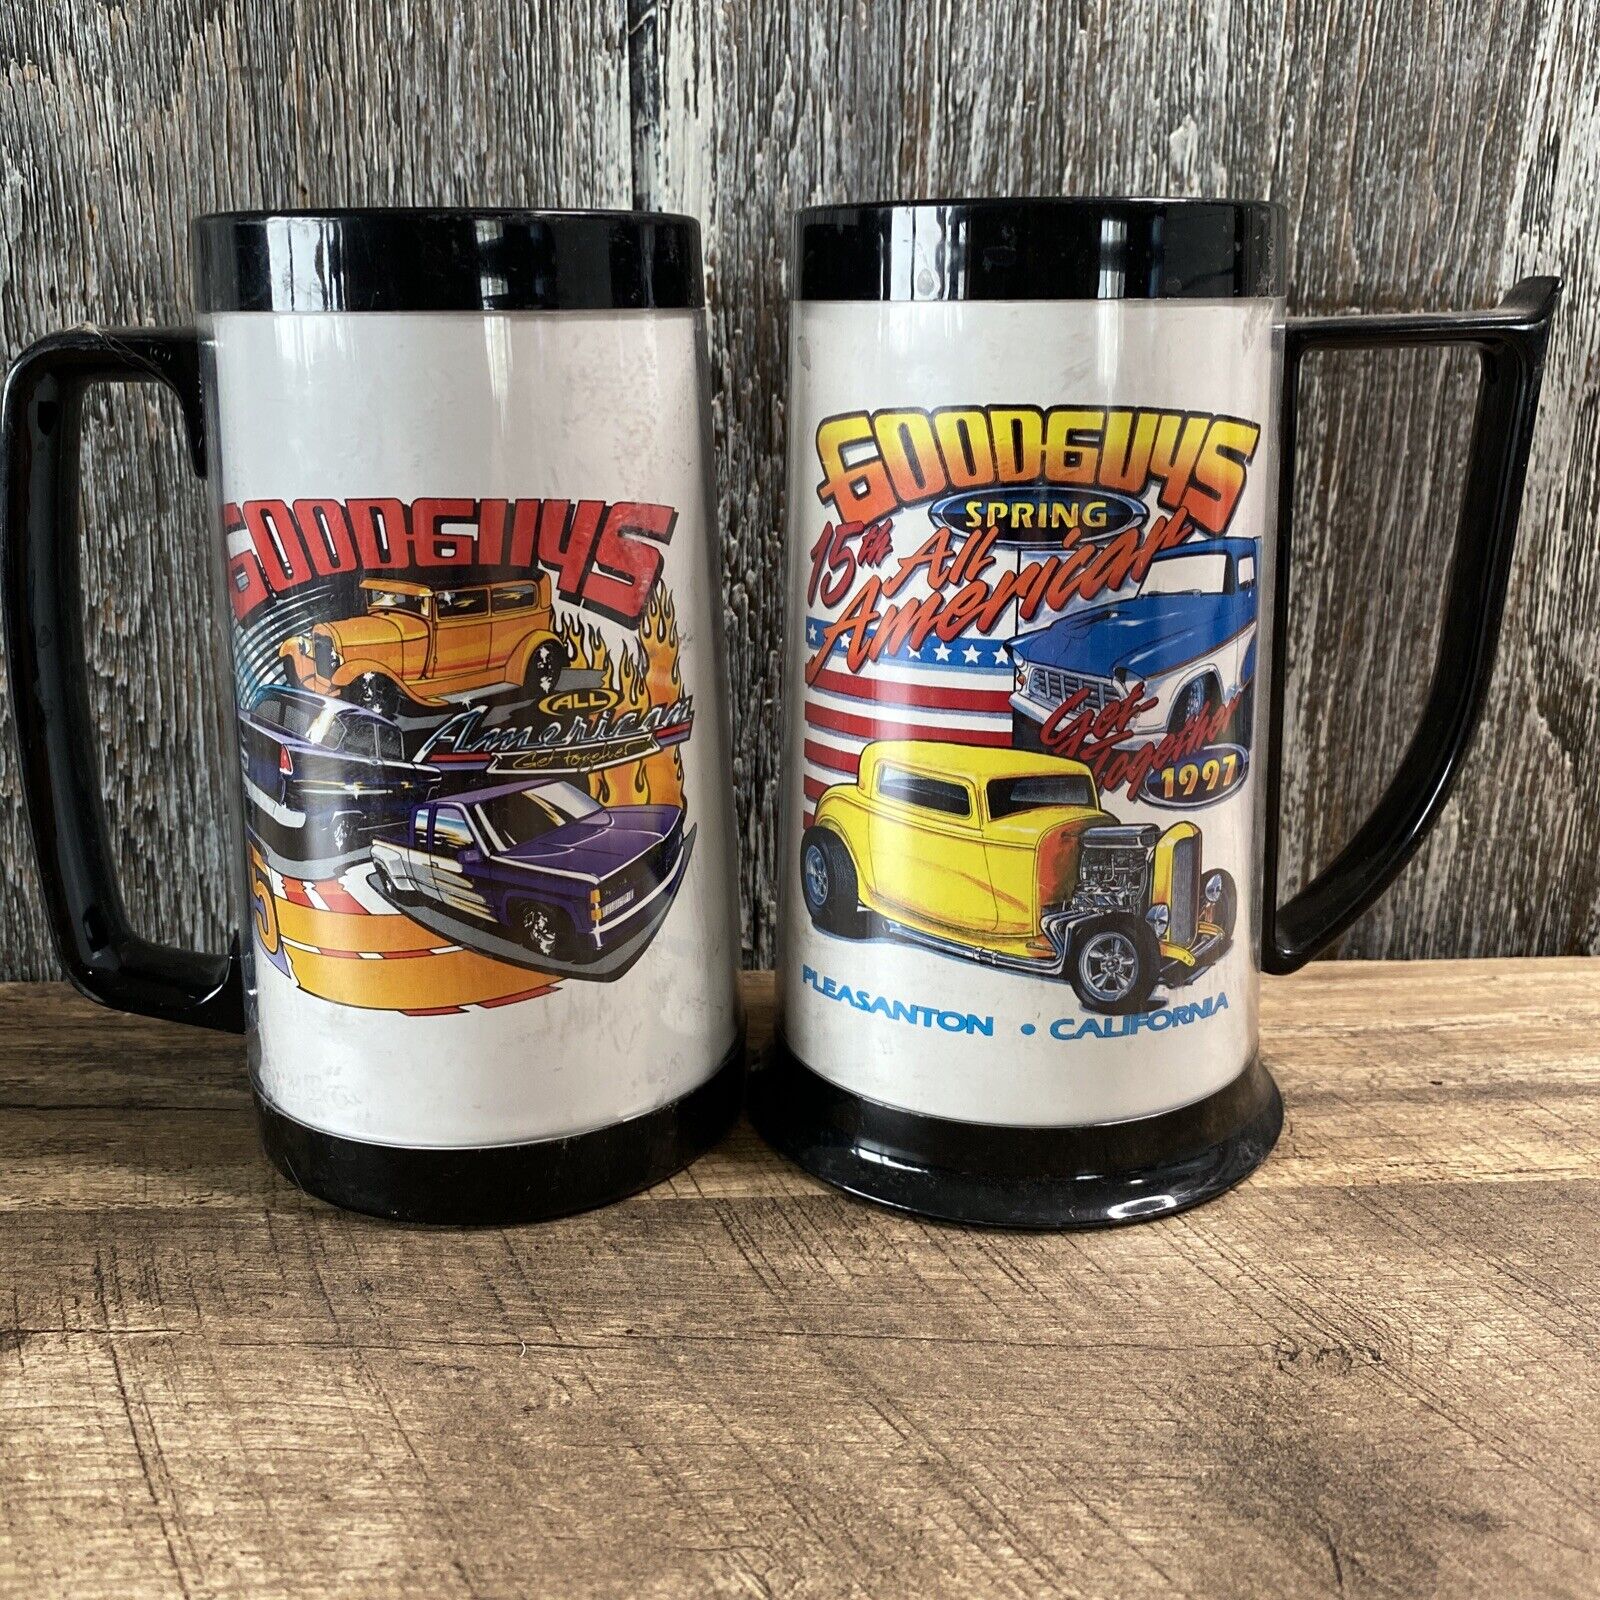 Vintage 90’s Good Guys Hot Rod muscle car Plastic Mugs Cups USA Made Lot of 2